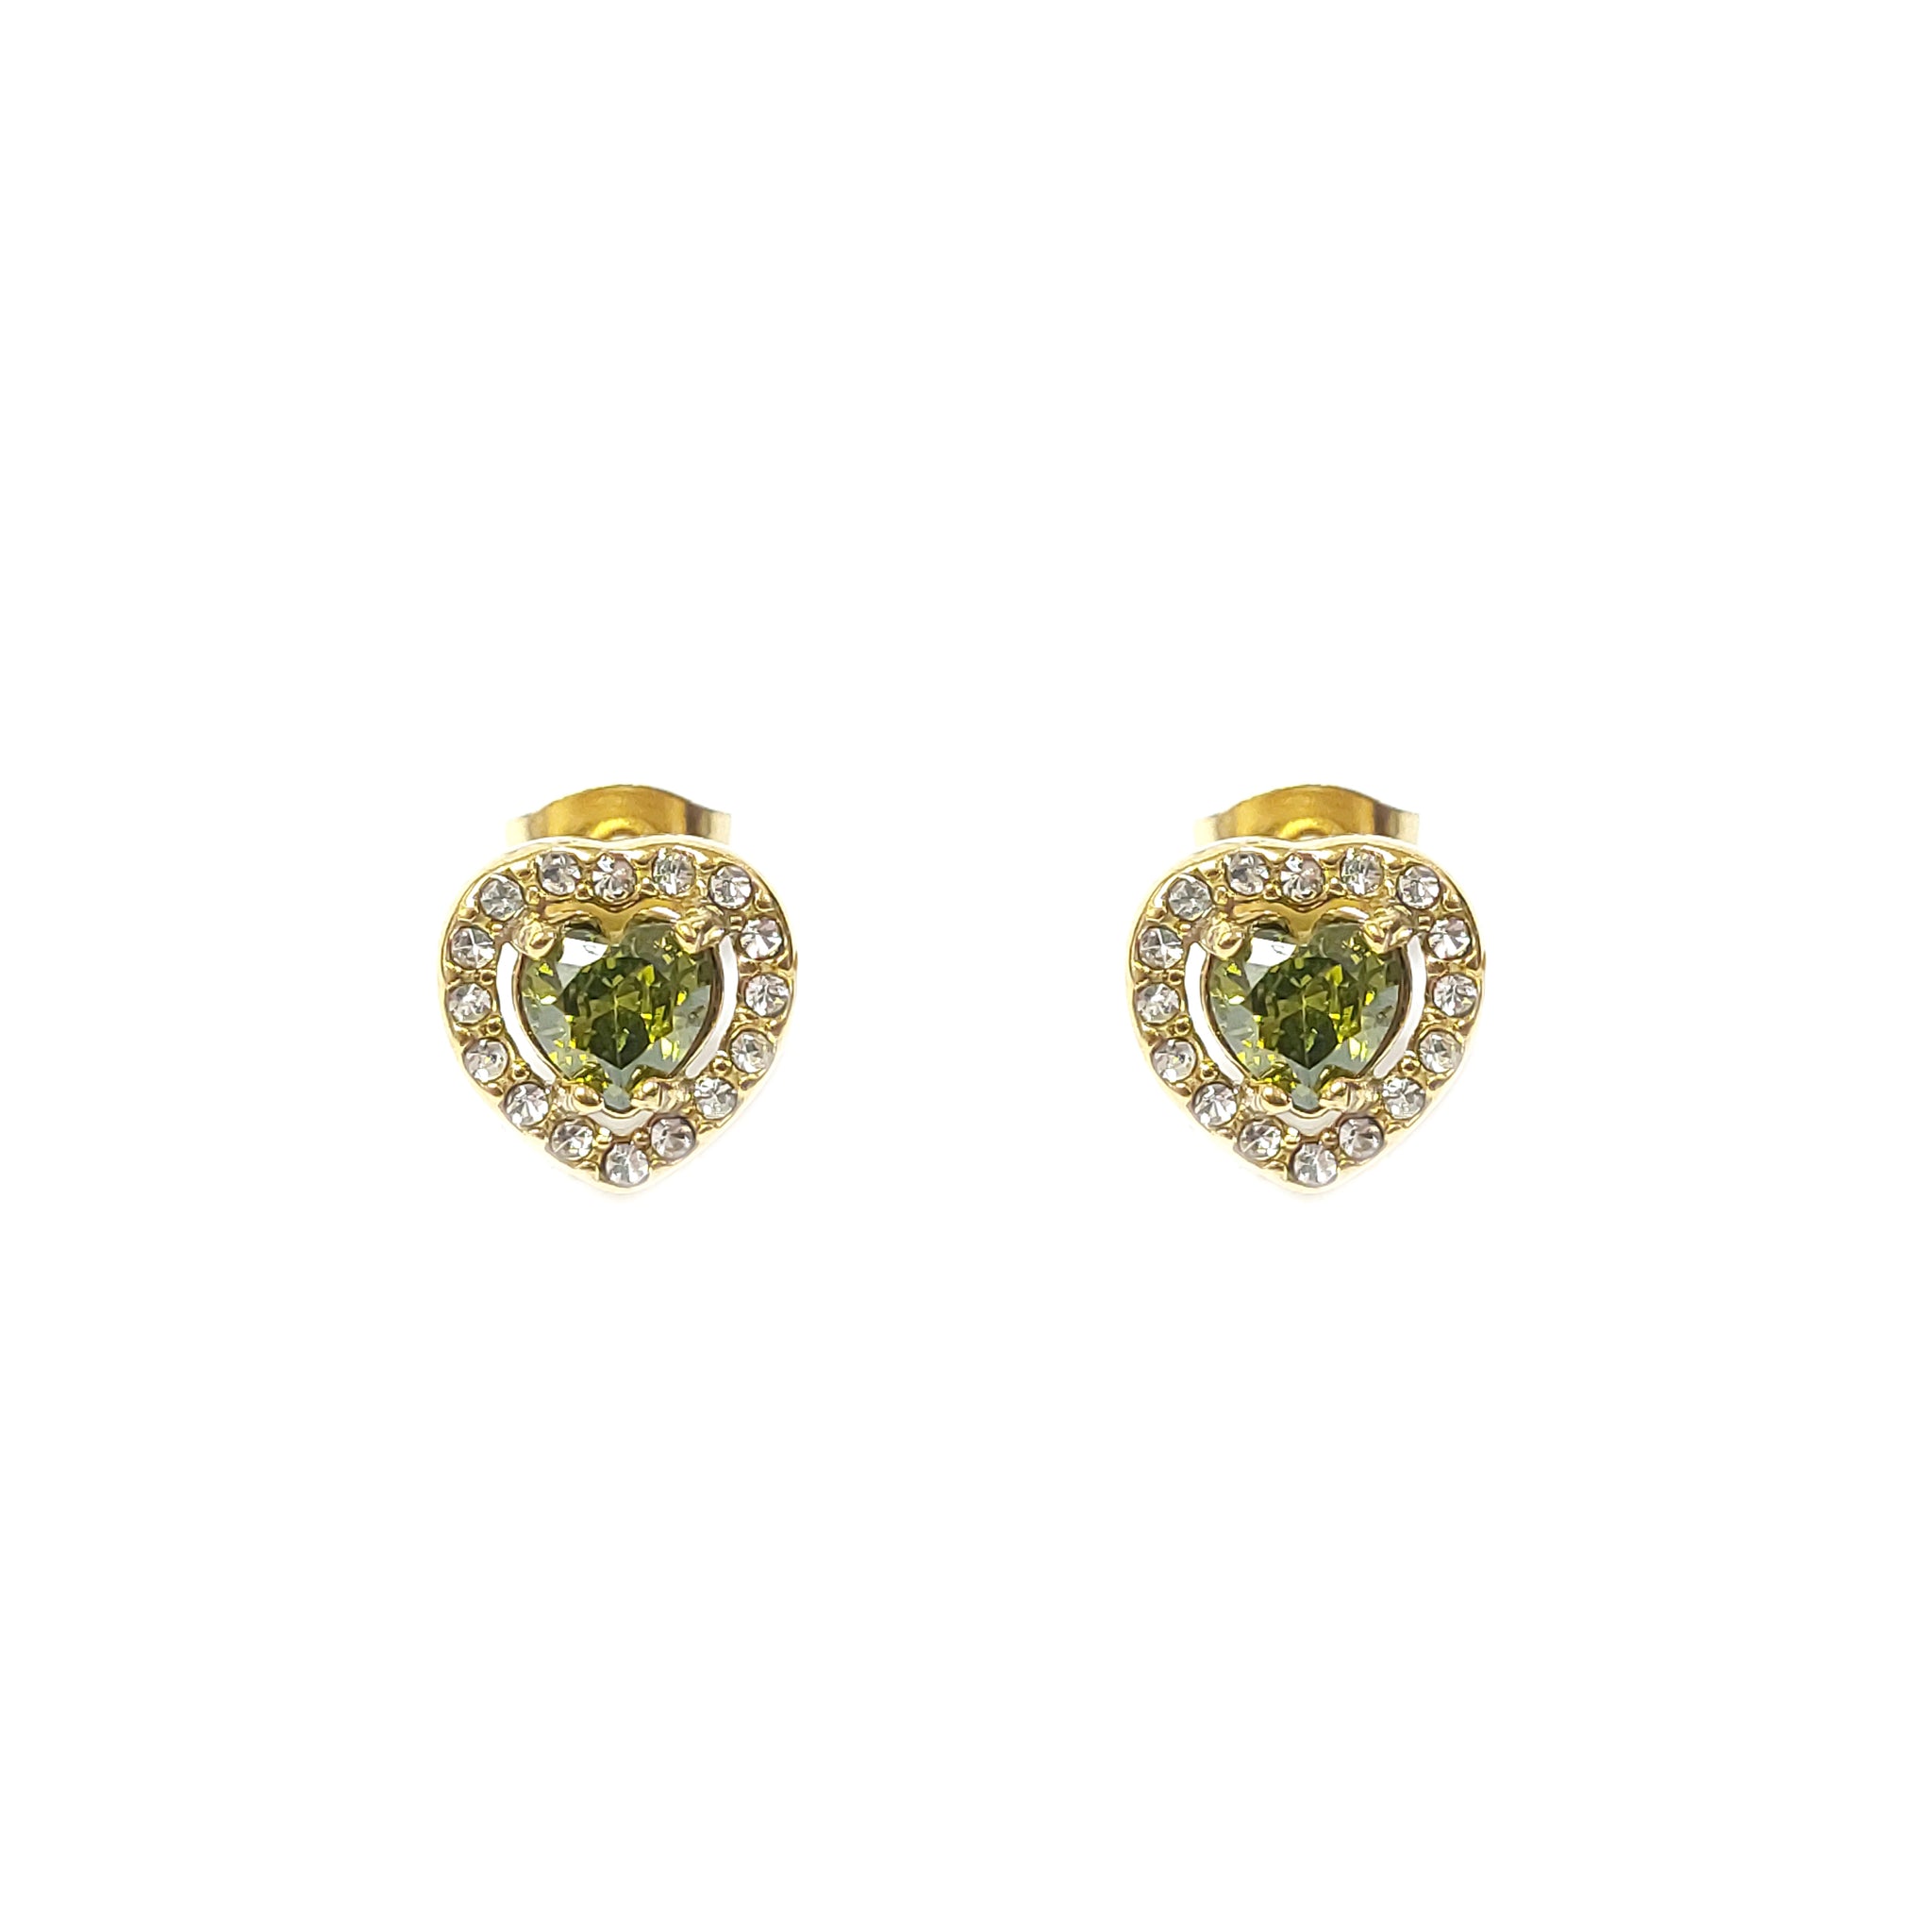 ESE 7932: All IPG Enclosed Cz-Studded Light Emerald Heart Cz Earrings